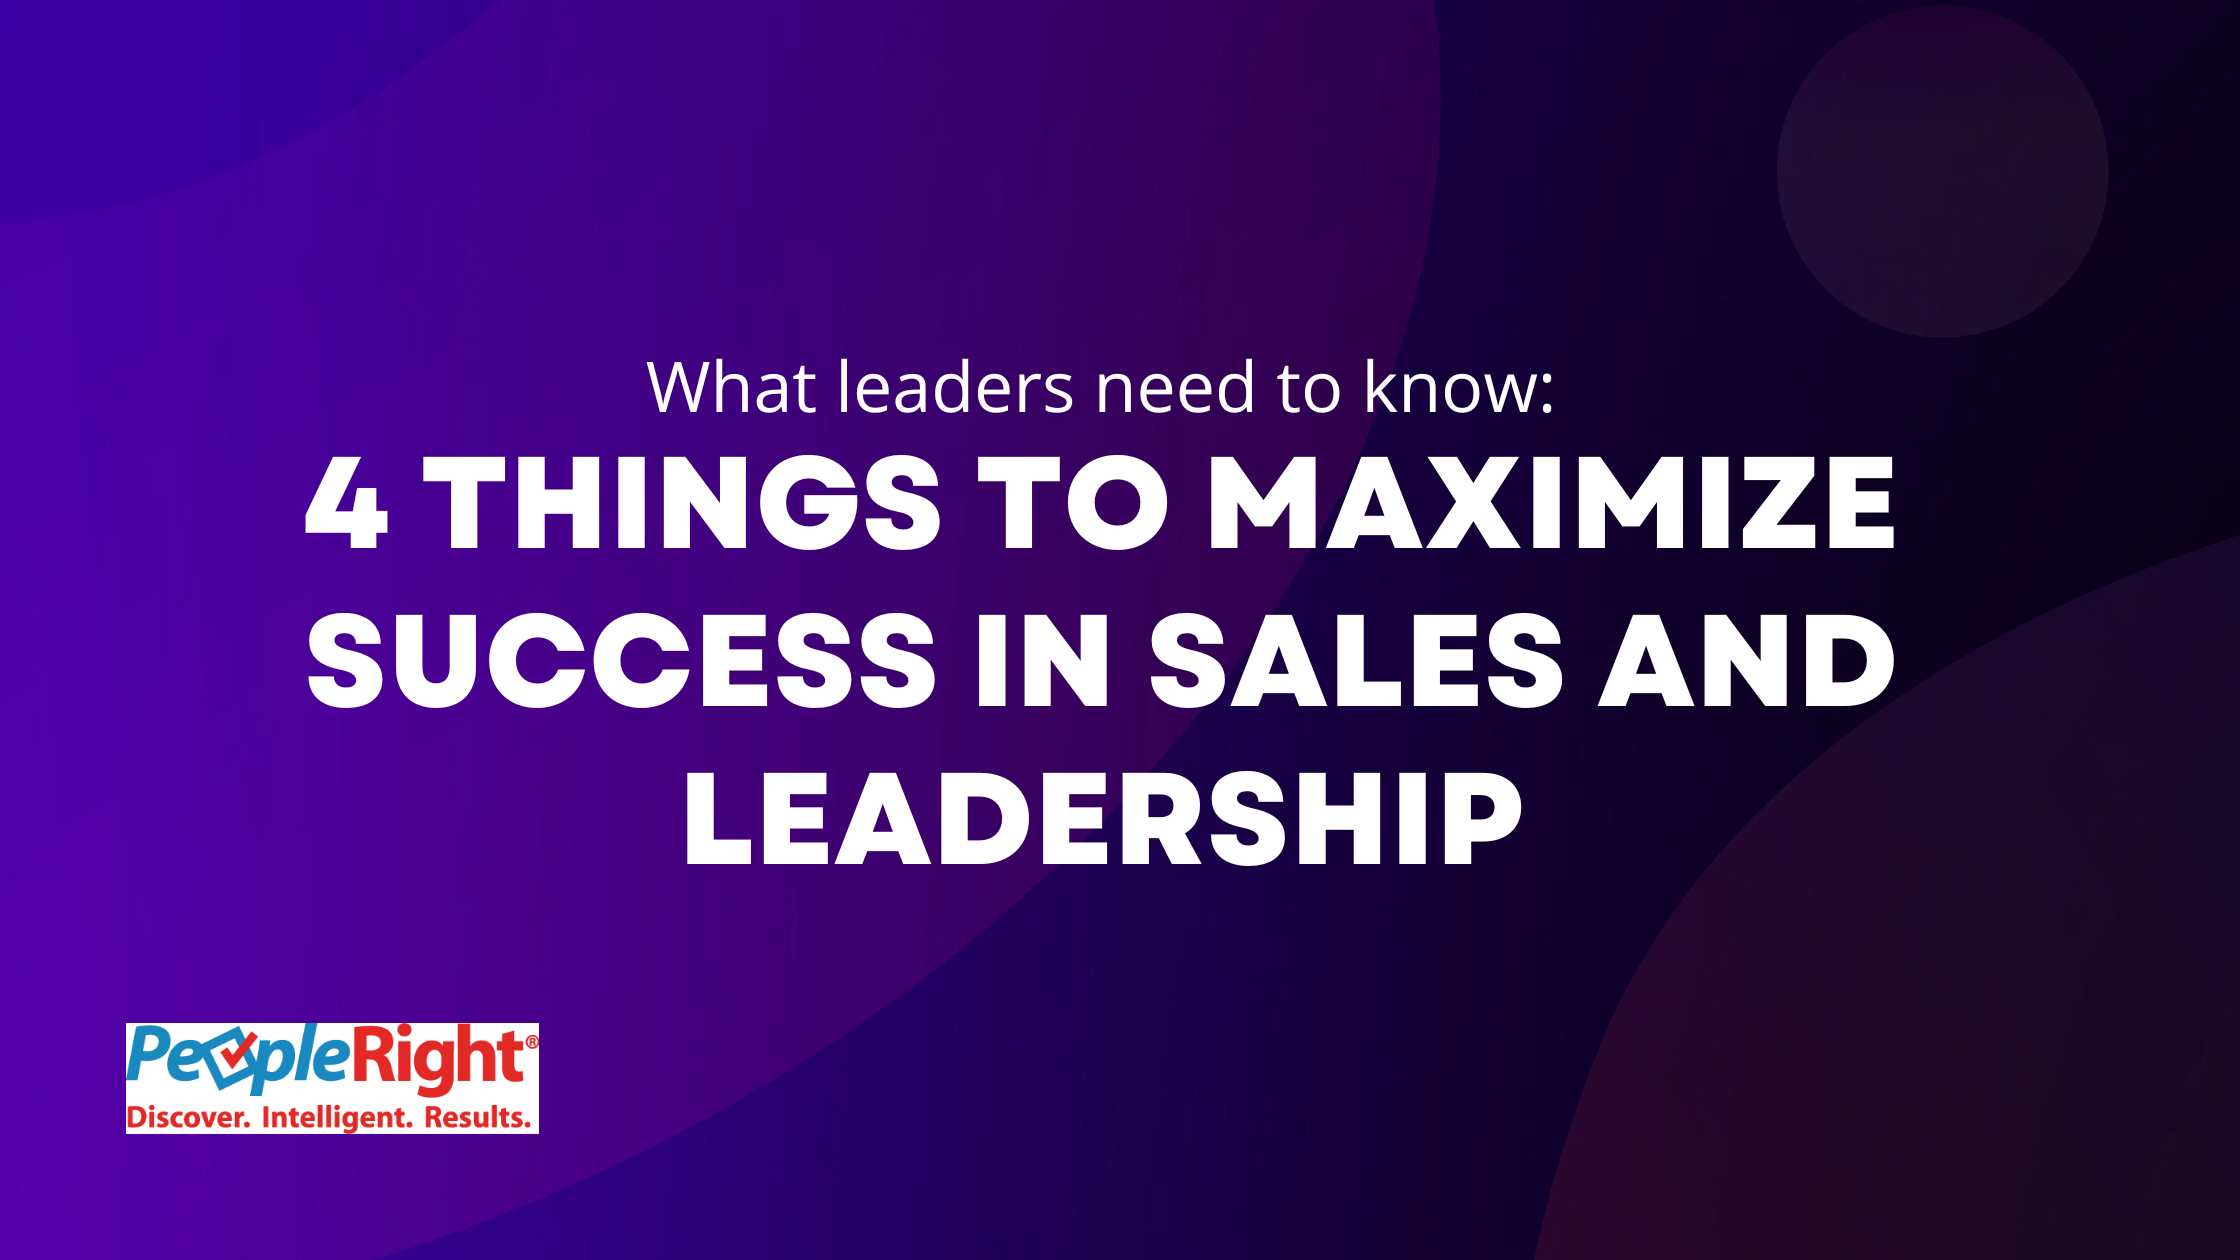 4 Things to Maximize Success in Sales and Leadership